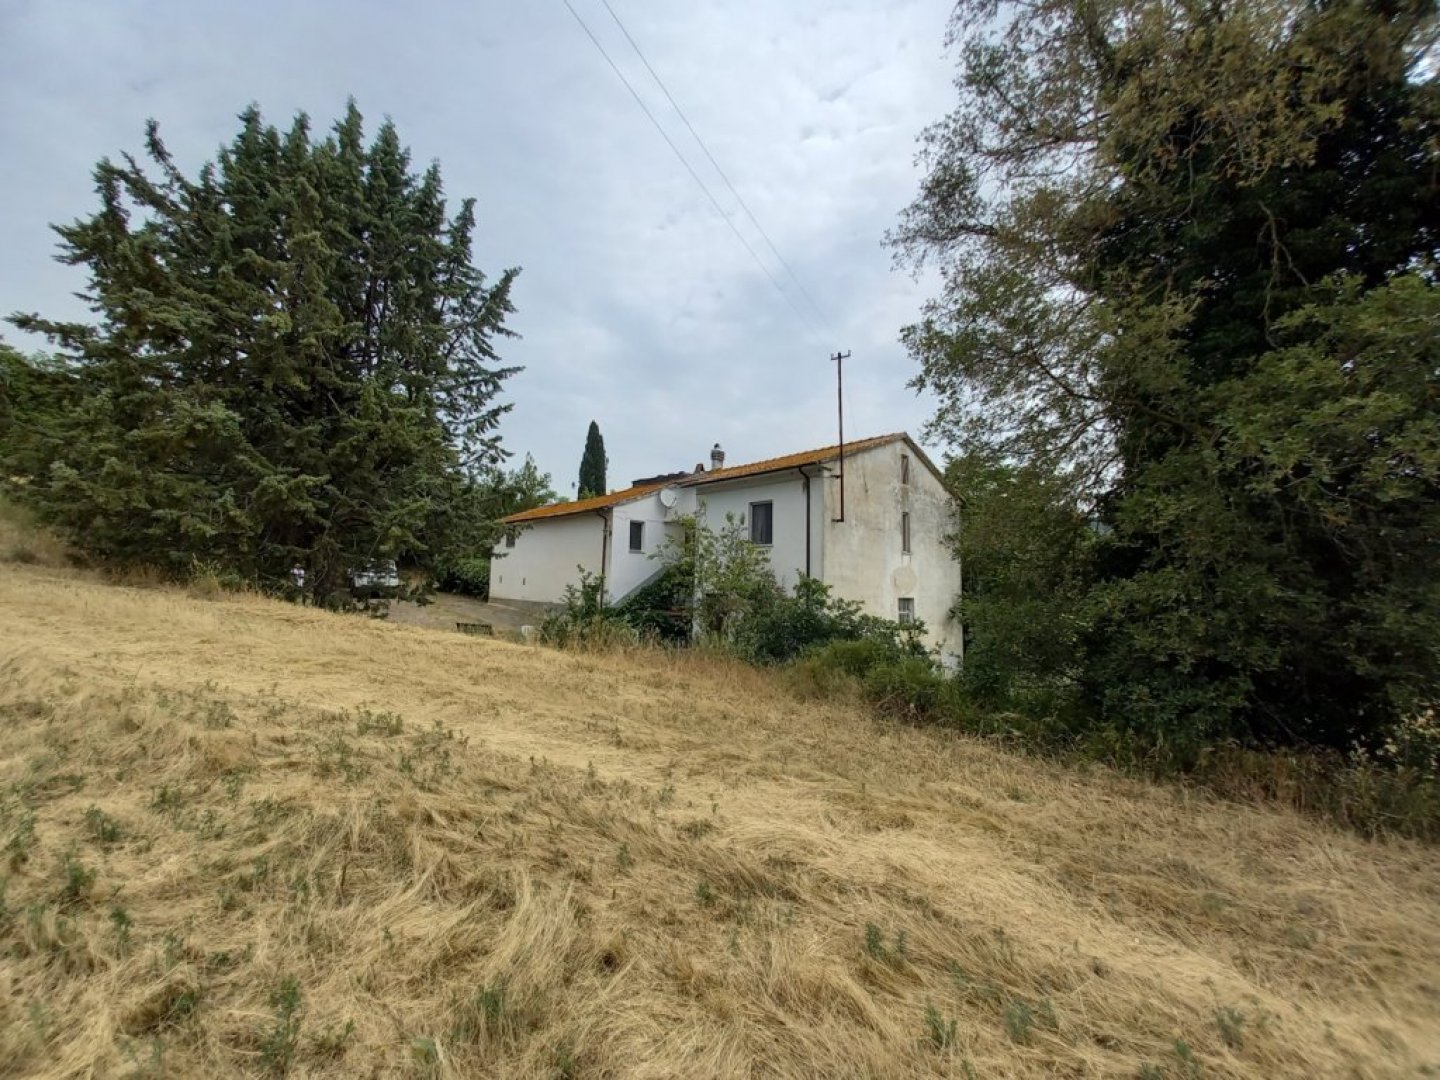 Detached house in the open countrysideg_20220617081701 ium36909-g_20220617081701.